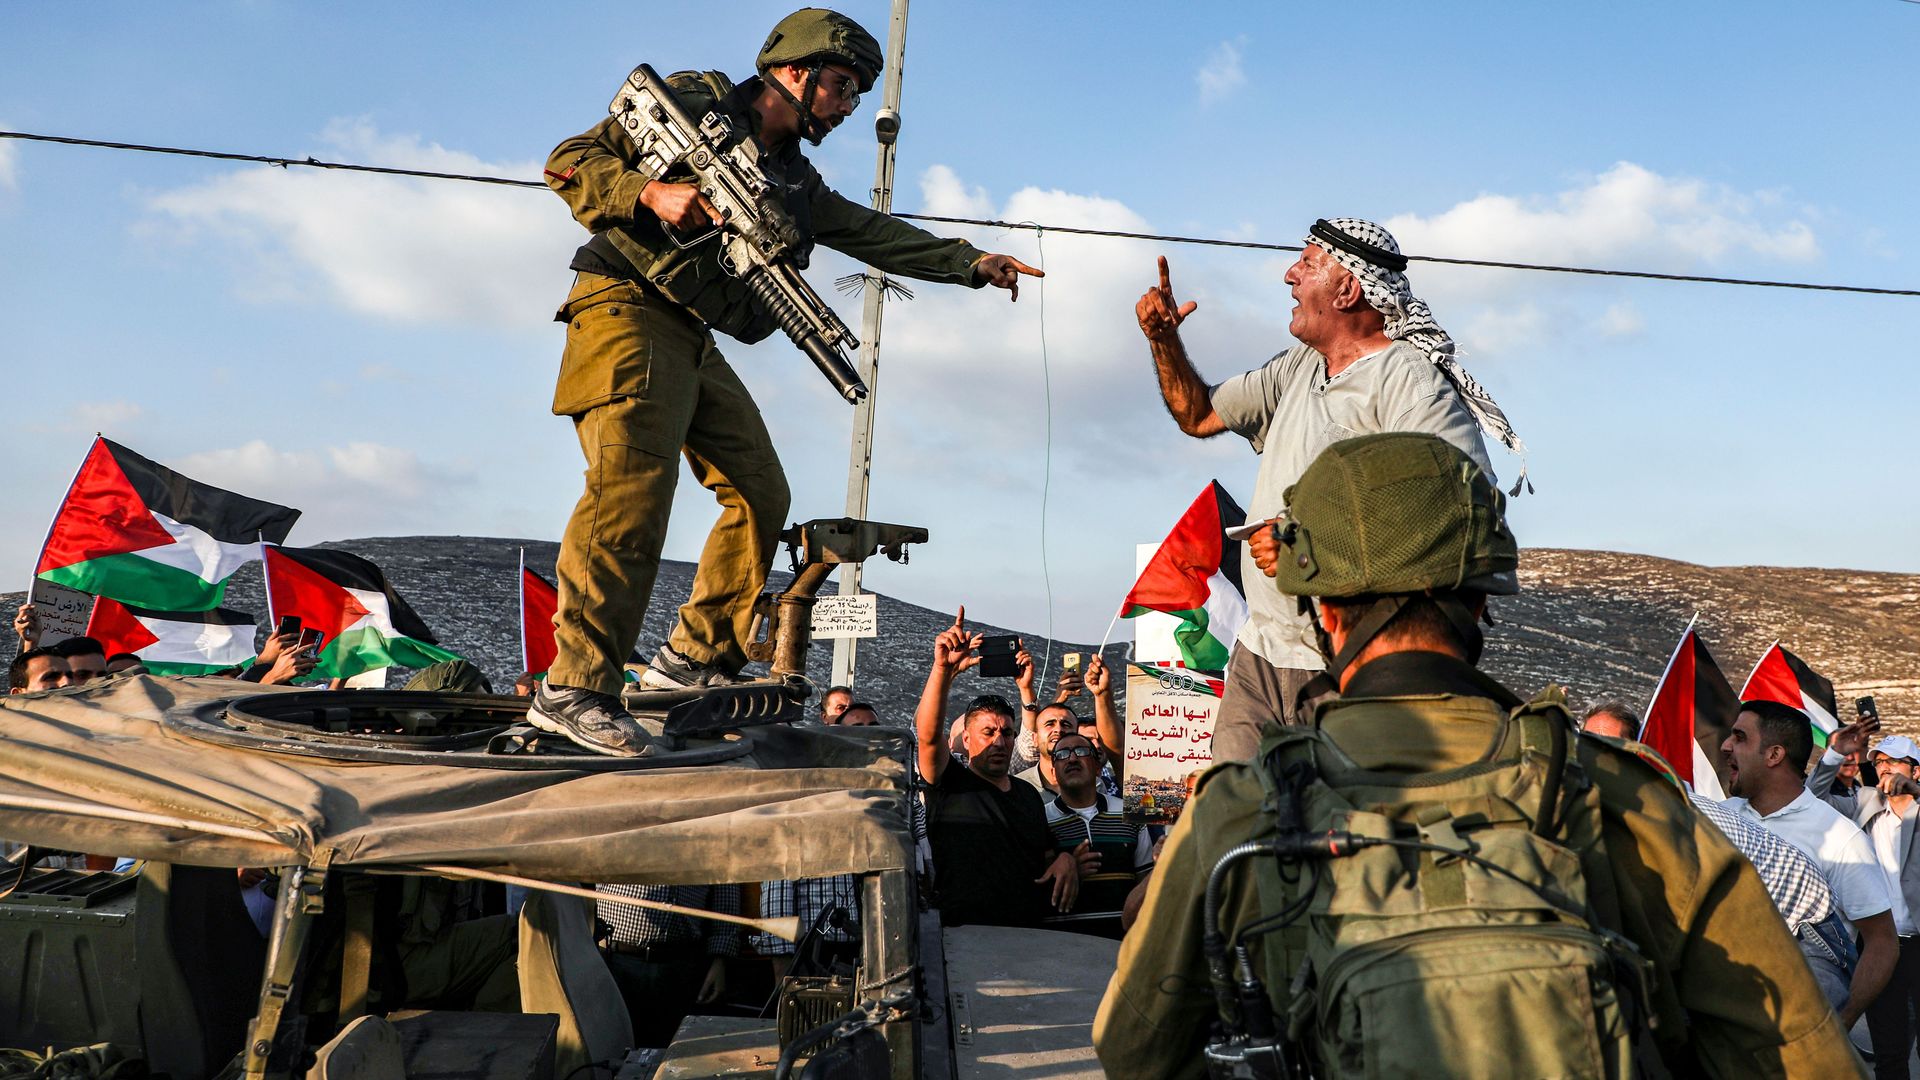 A Palestinian protester yells at an Israeli soldier as he confronts him atop an Israeli army vehicle during a protest on September 4, 2019.